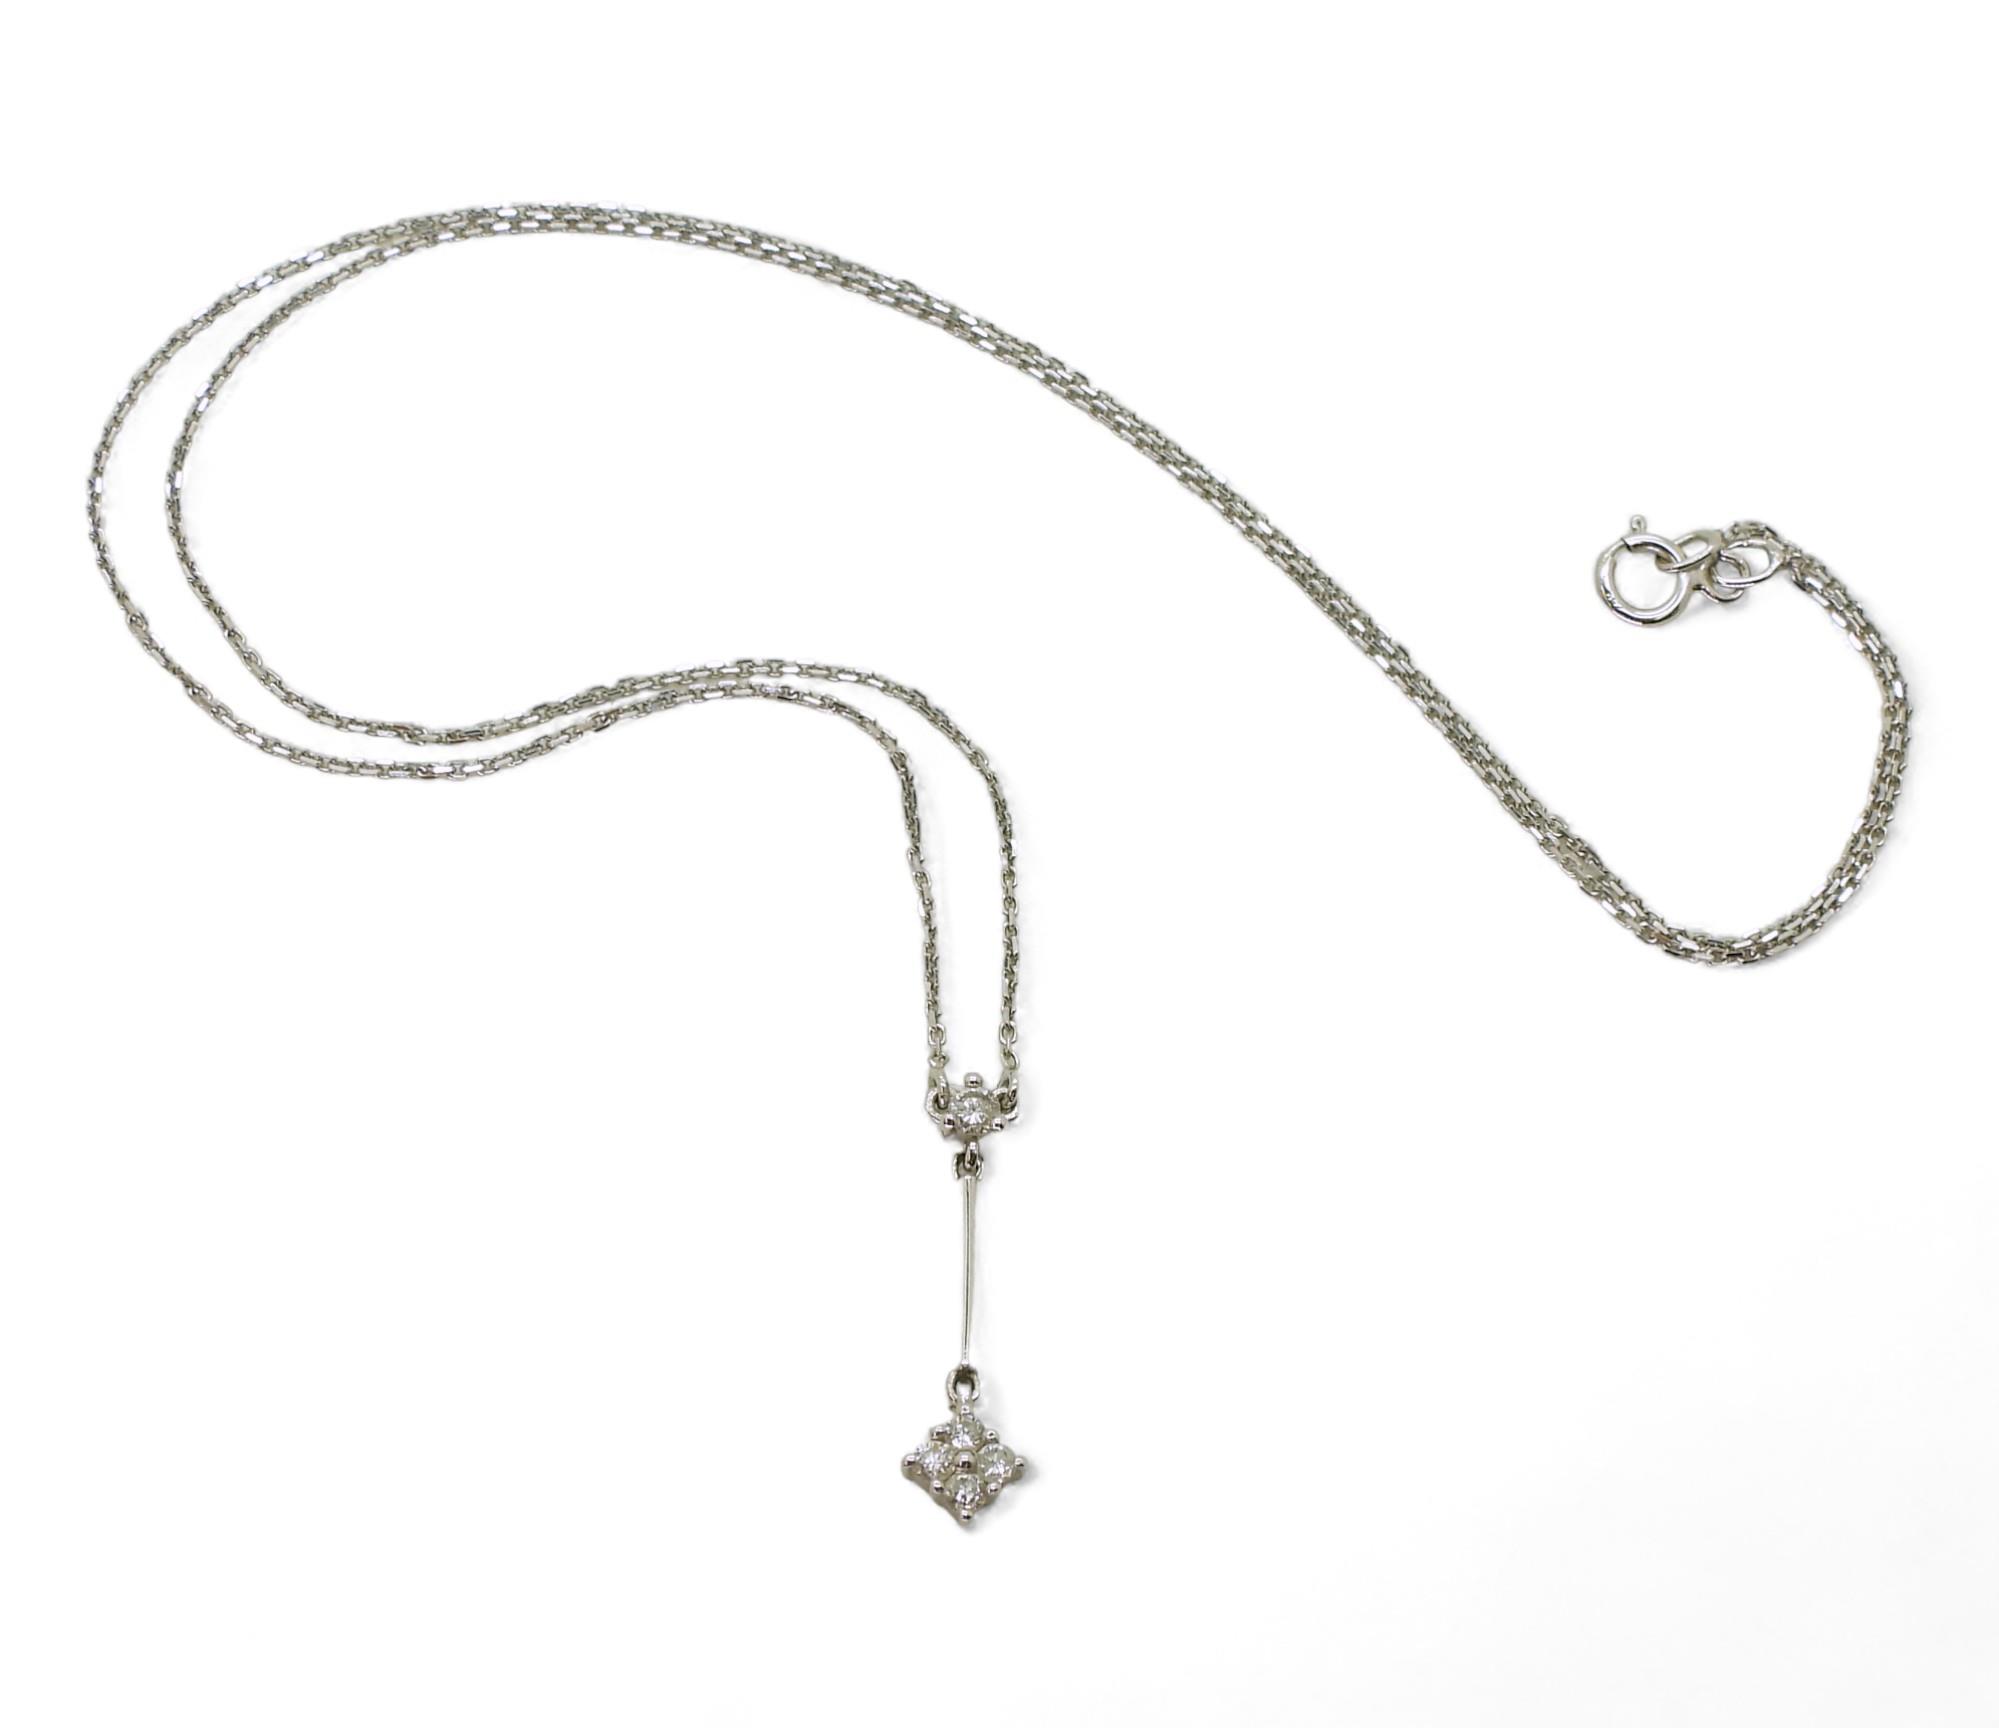 An 18ct white gold diamond pendant necklet, set with estimated approx 0.12cts of brilliant cut